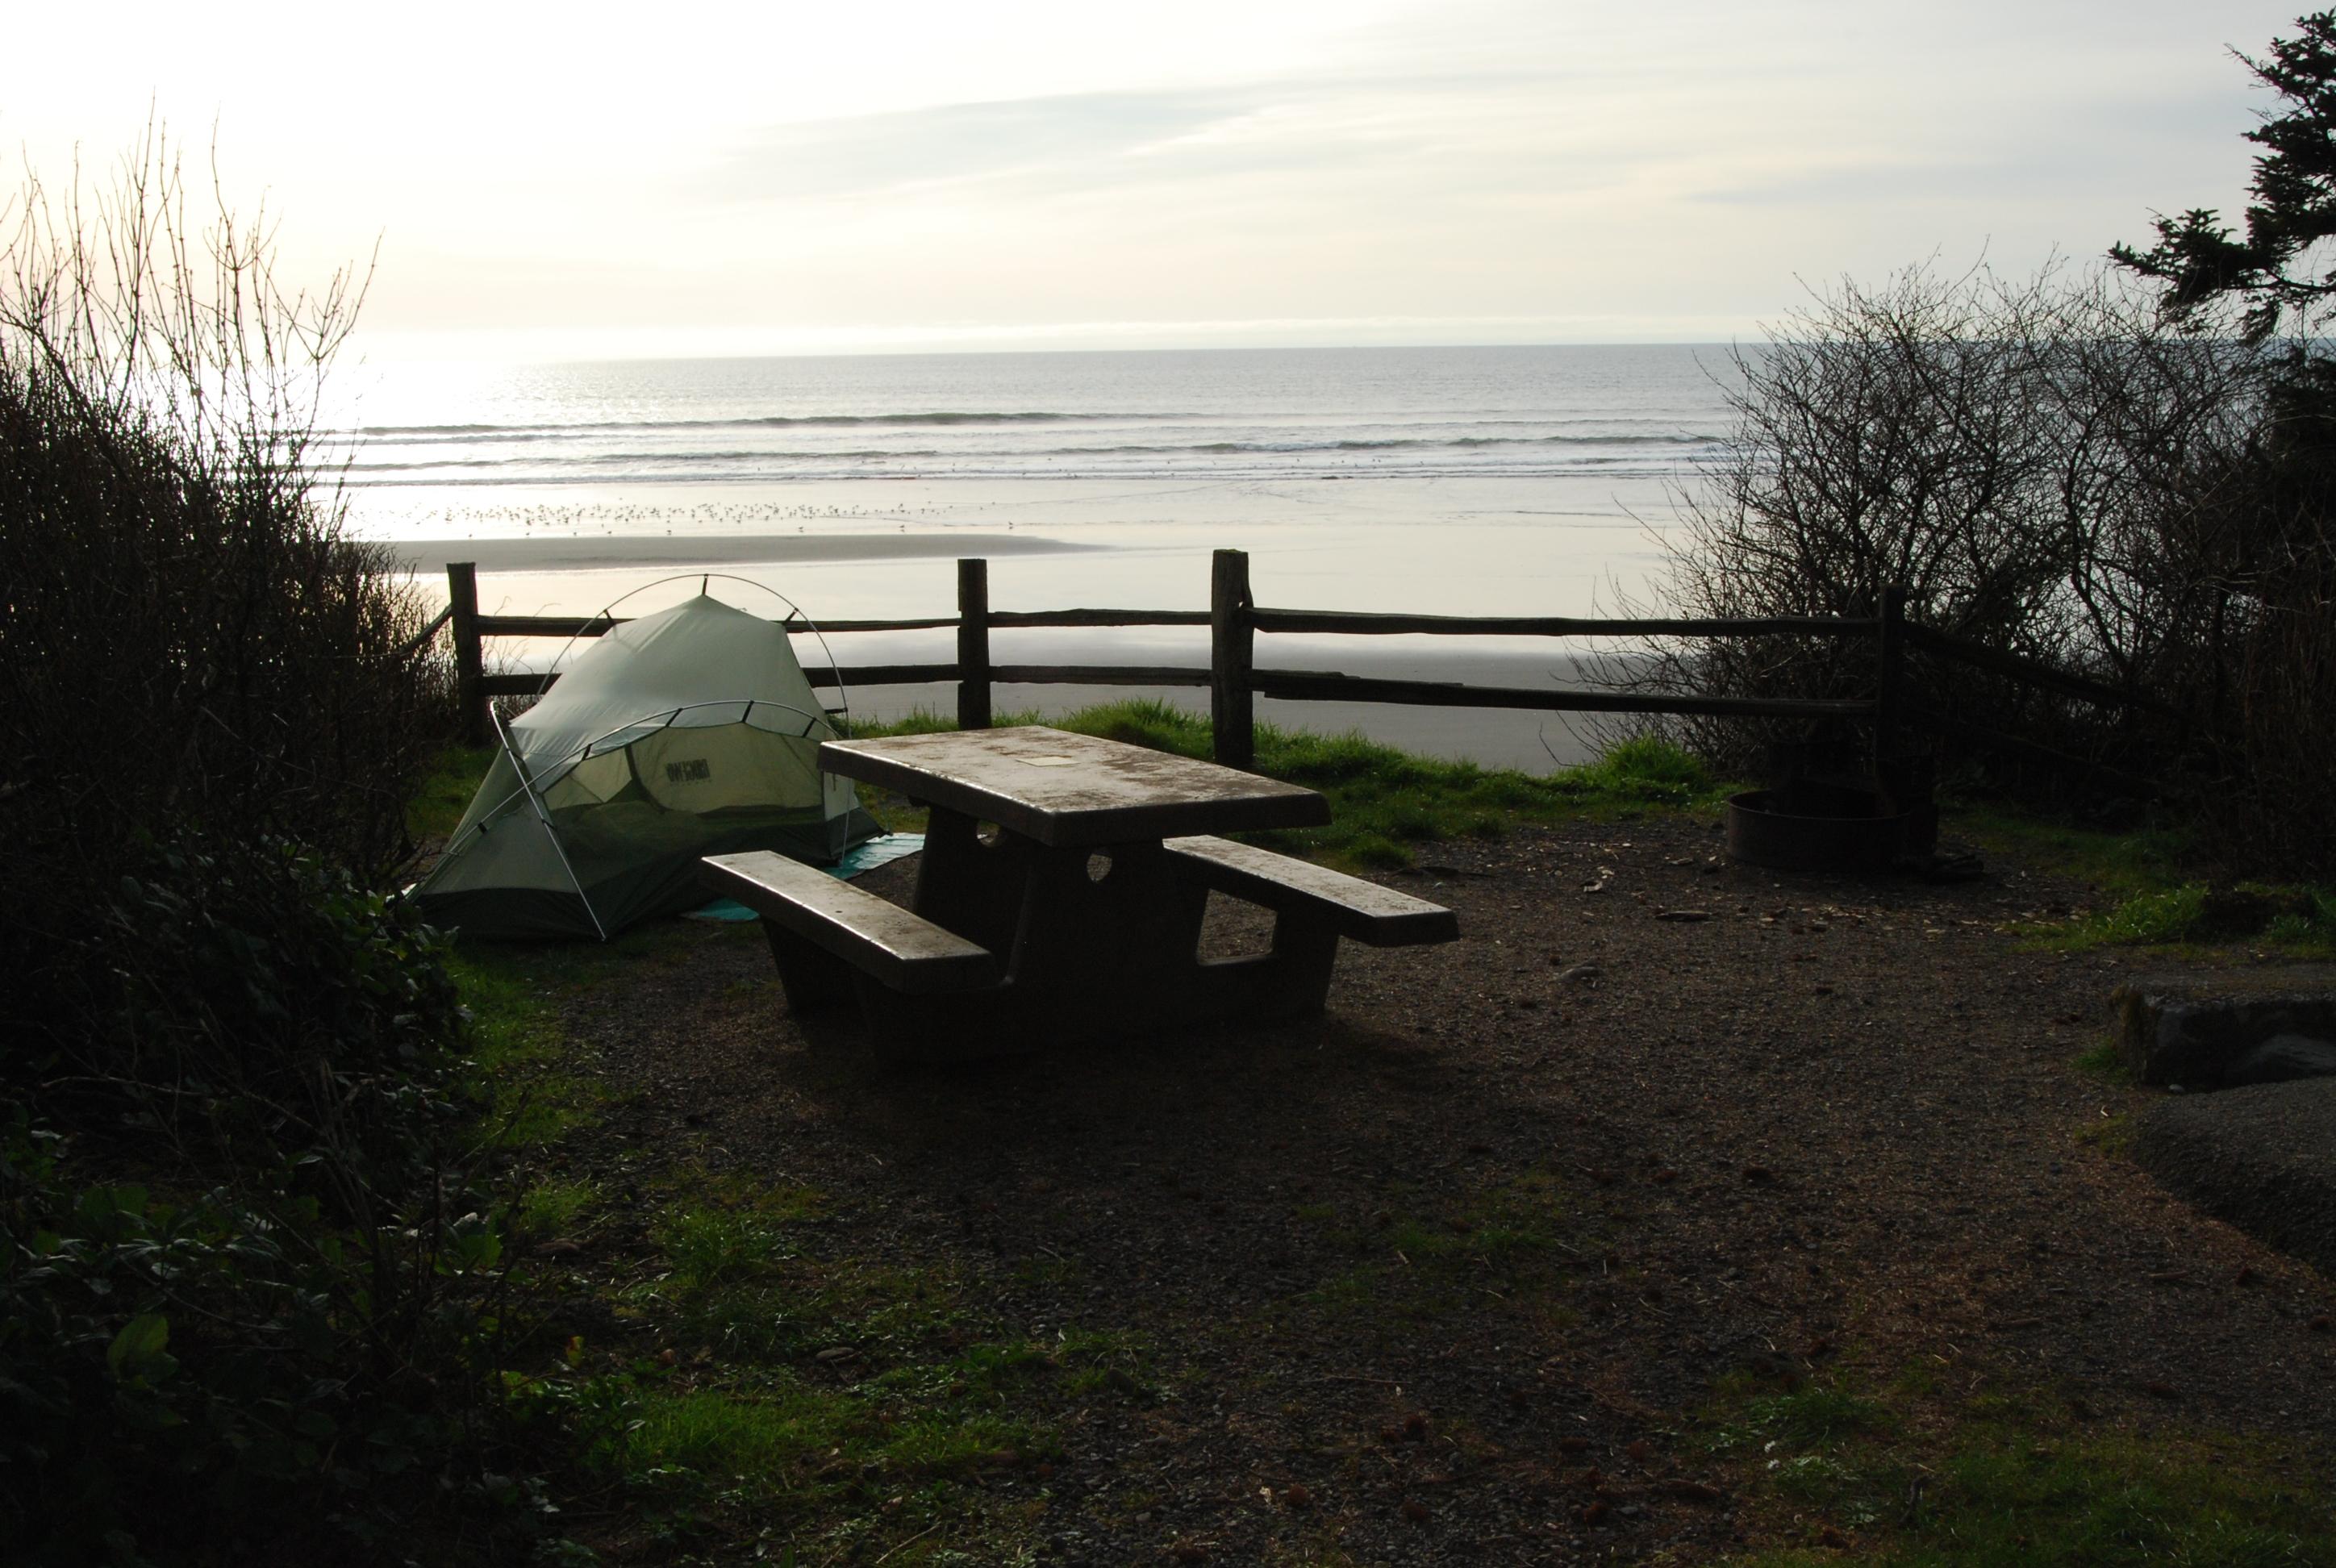 A campsite with a picnic table and tent, overlooking the ocean.